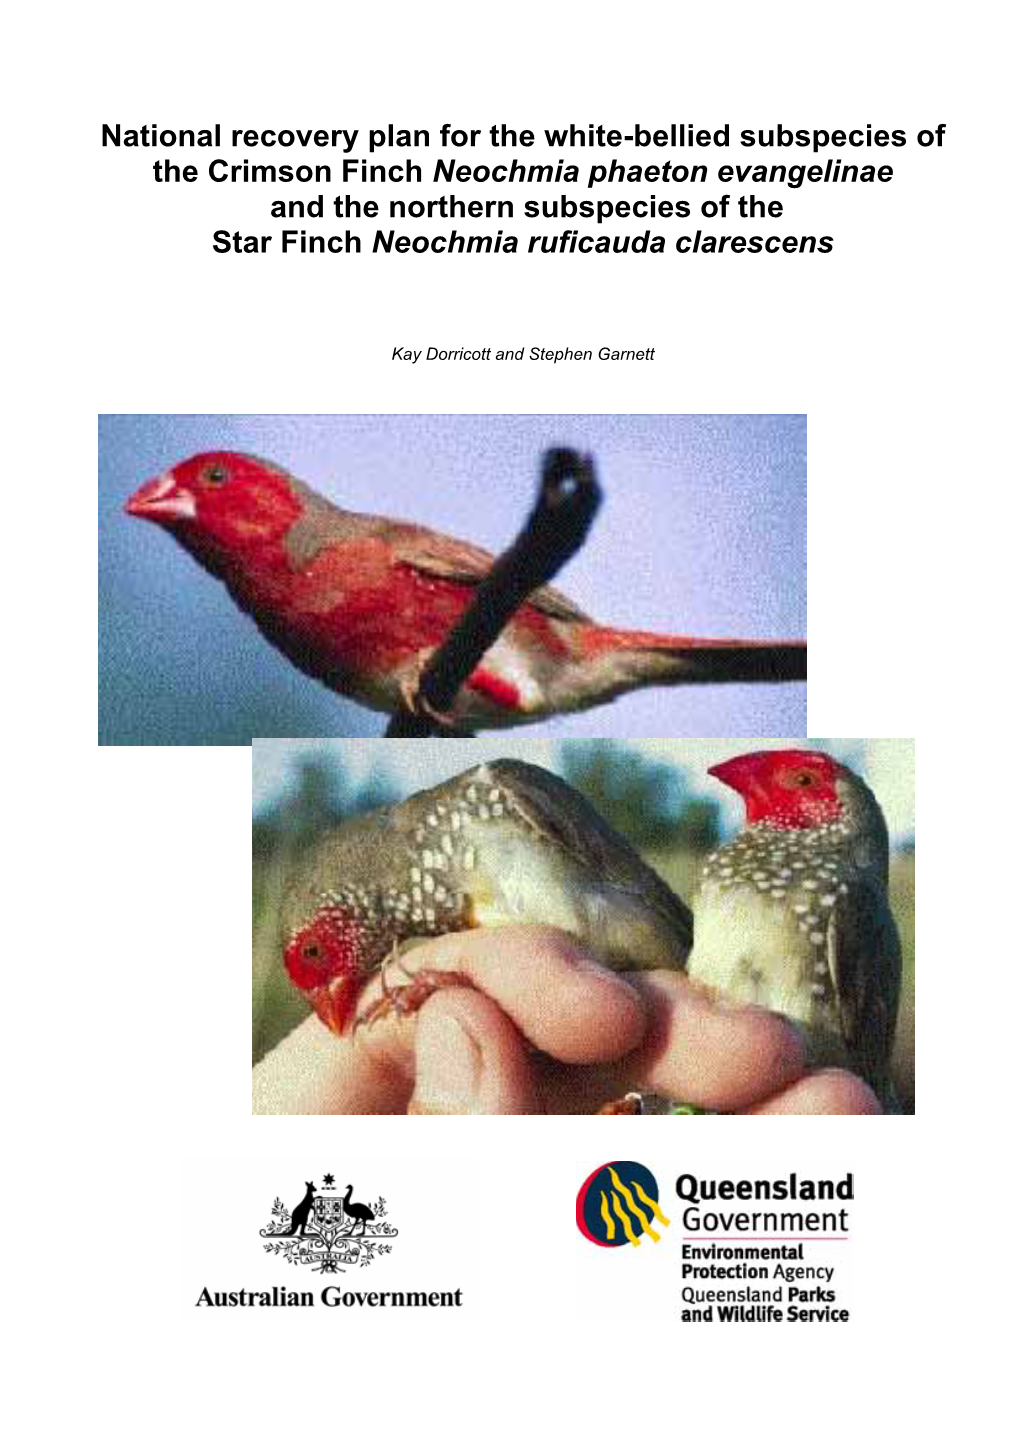 National Recovery Plan for the White-Bellied Subspecies of The